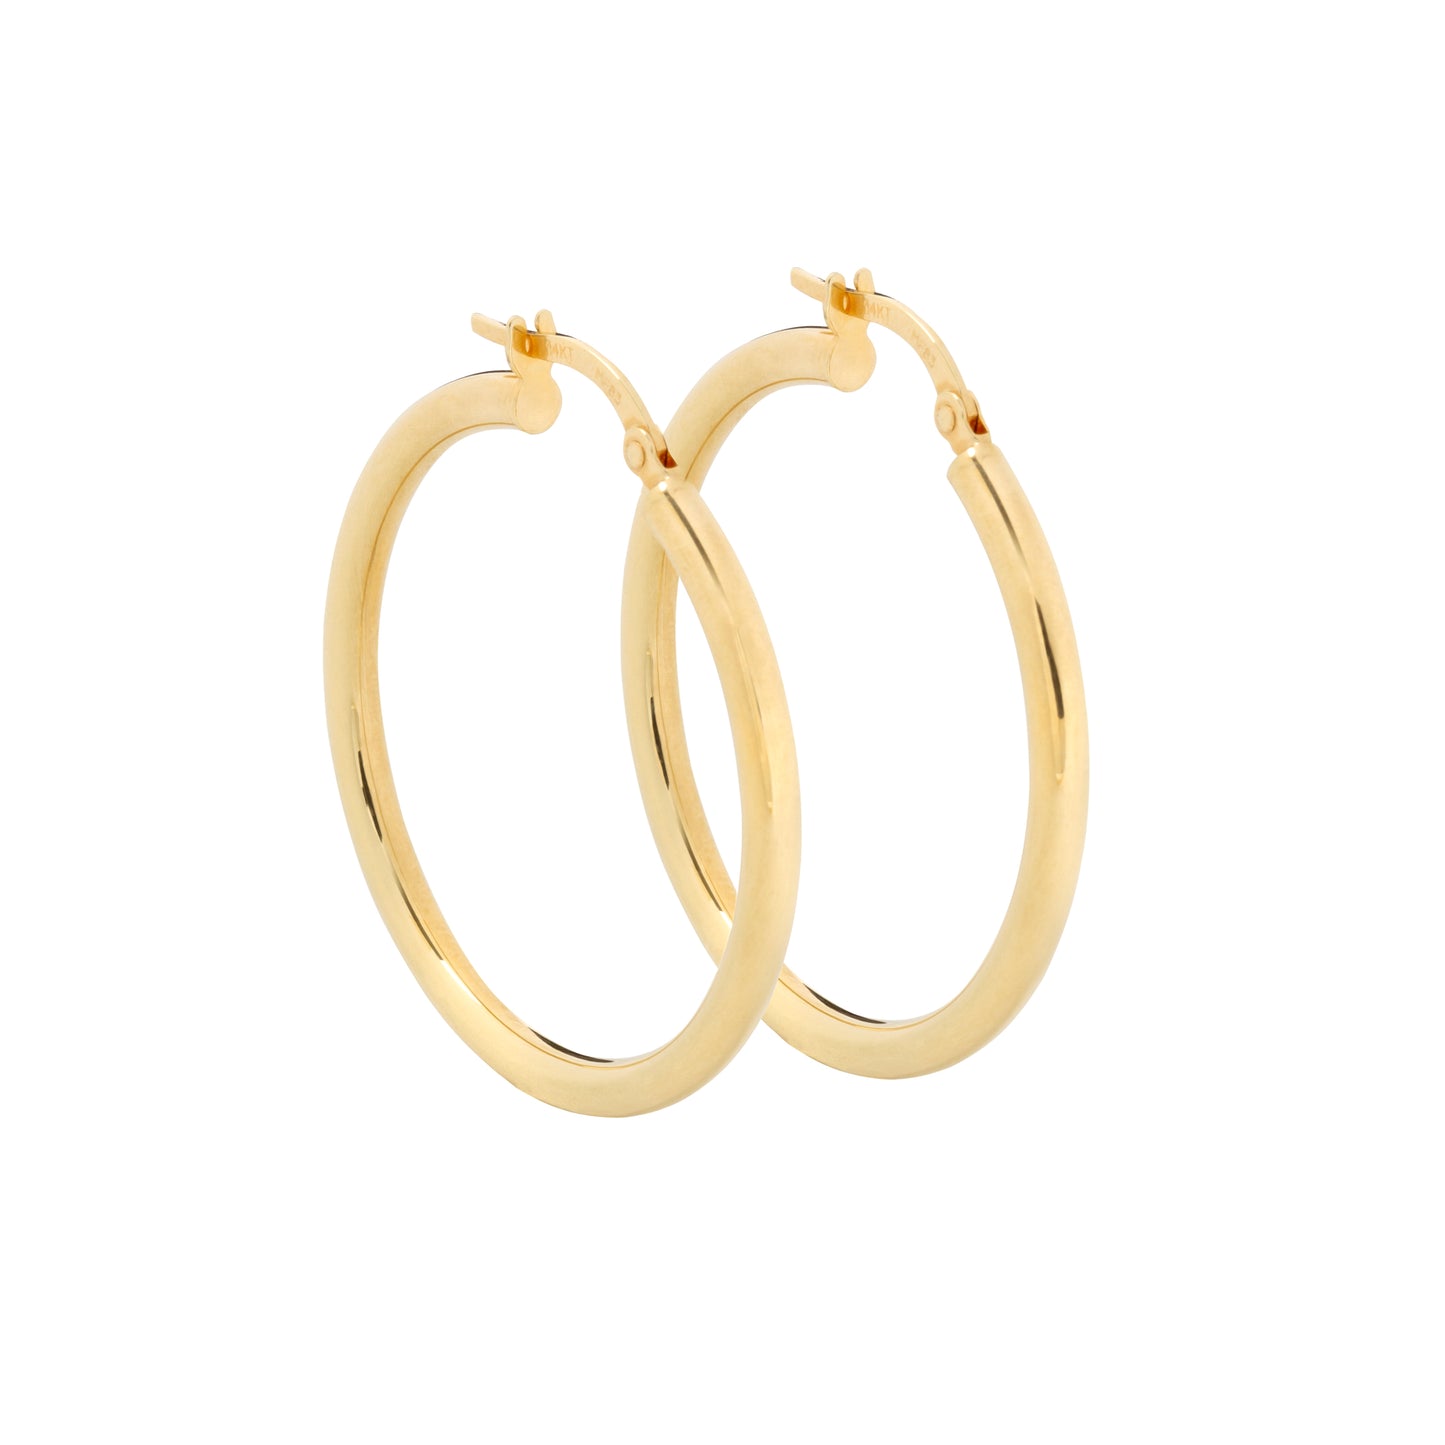 The Tubes Gold Hoops